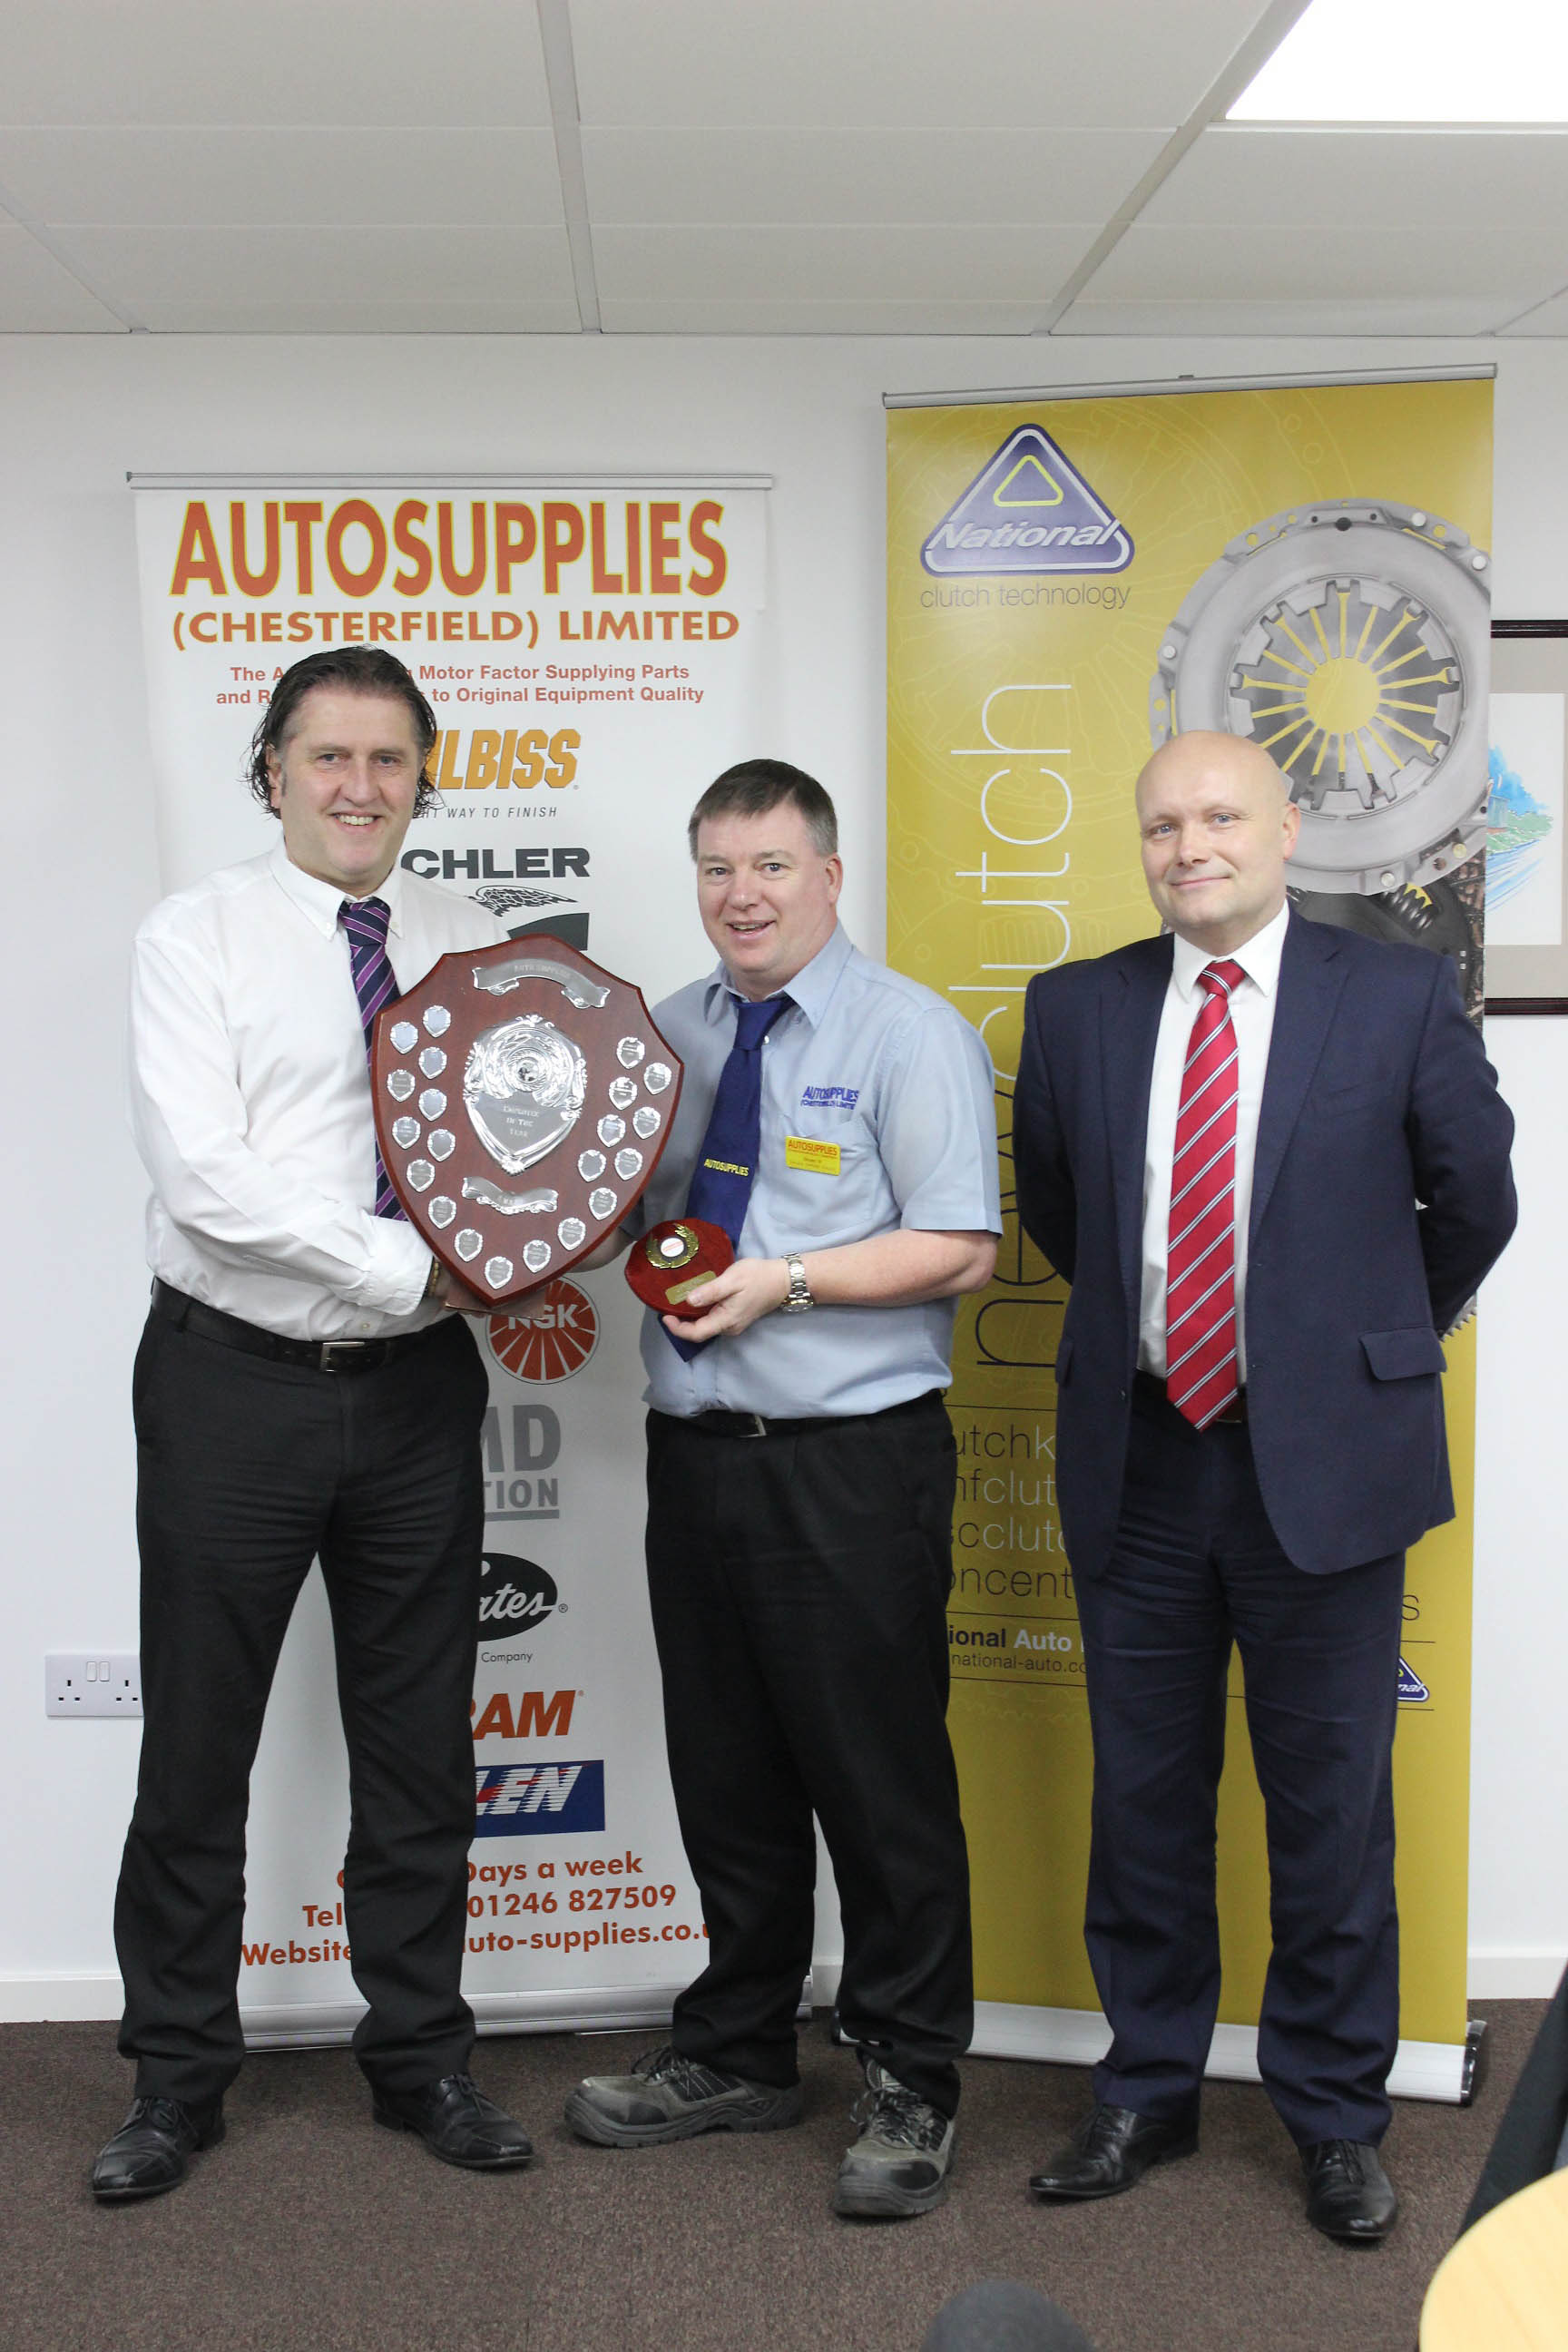 Bryan Barksby named Autosupplies’ Employee of the Year